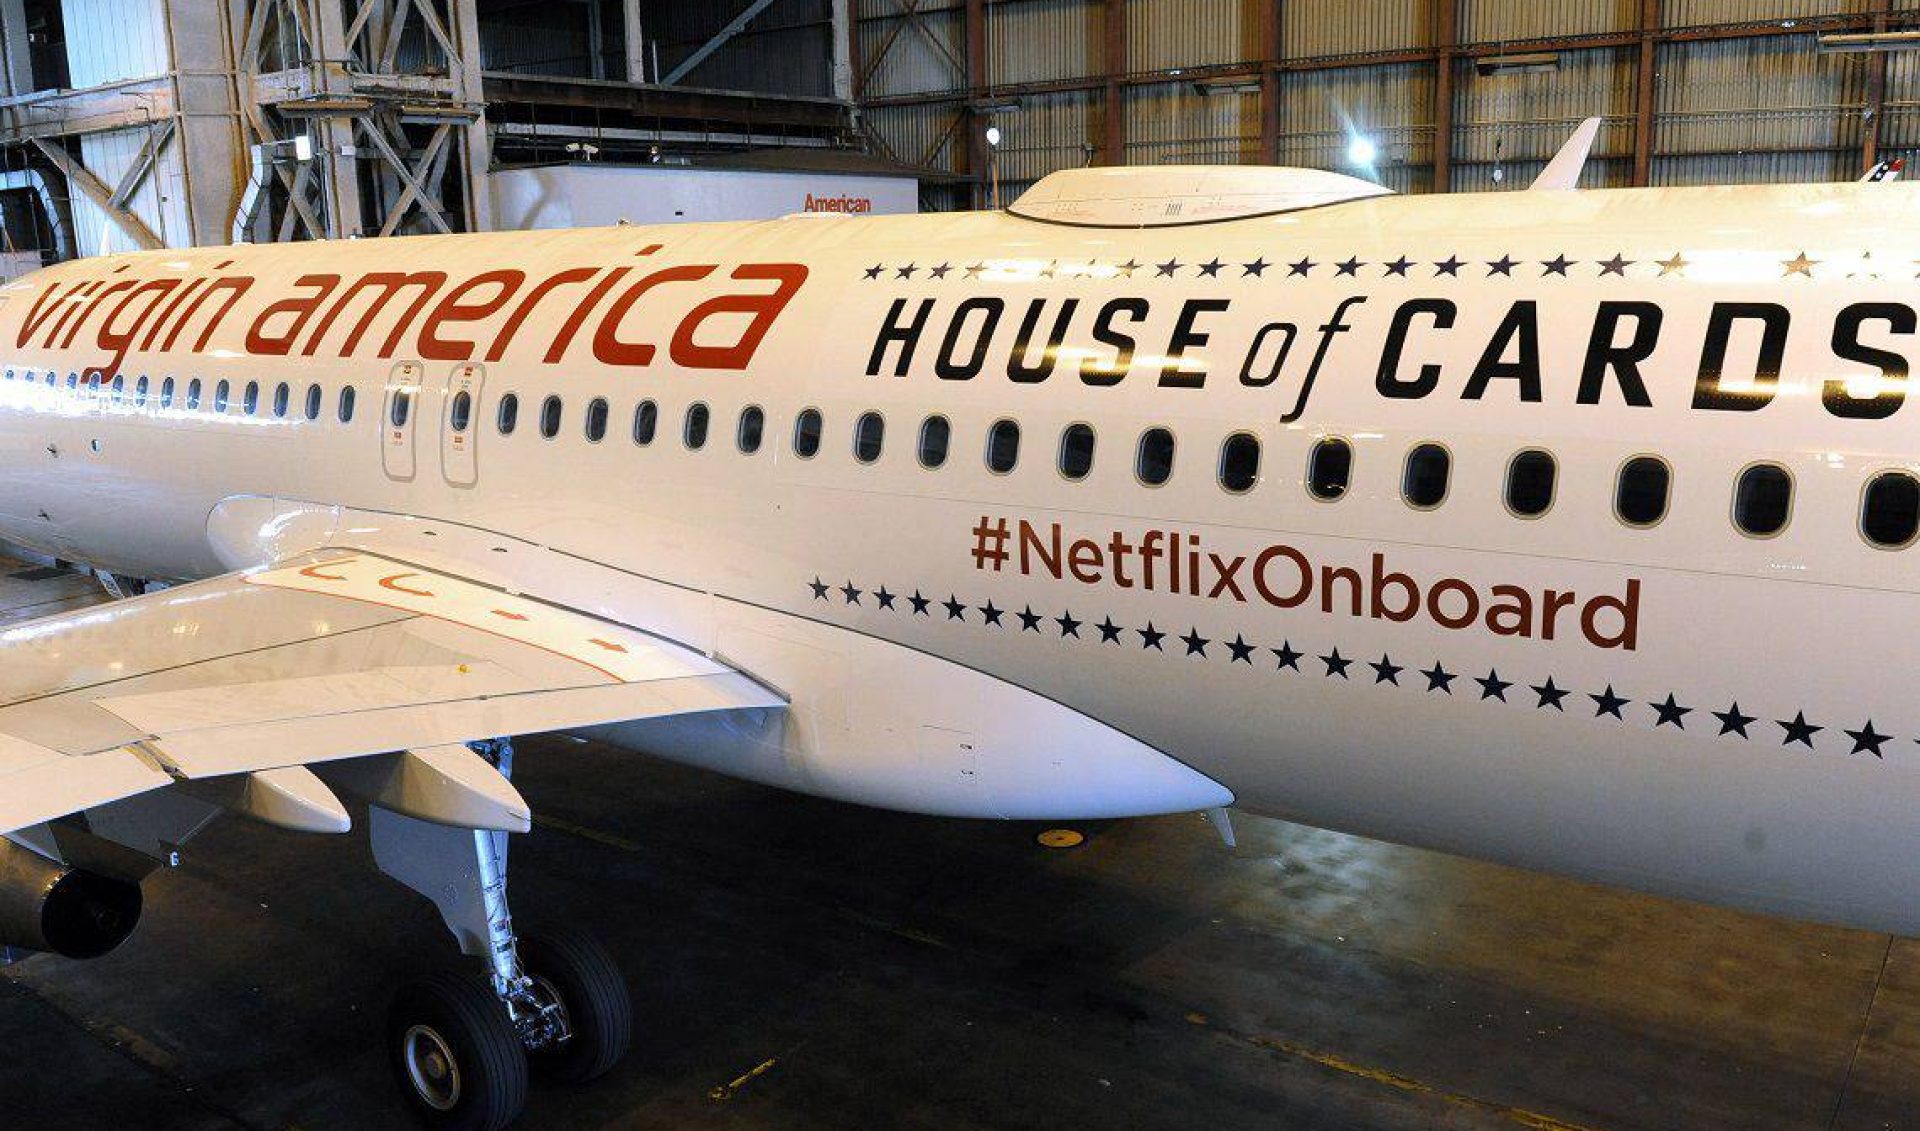 Netflix Teams With Virgin America For In-Flight Streaming